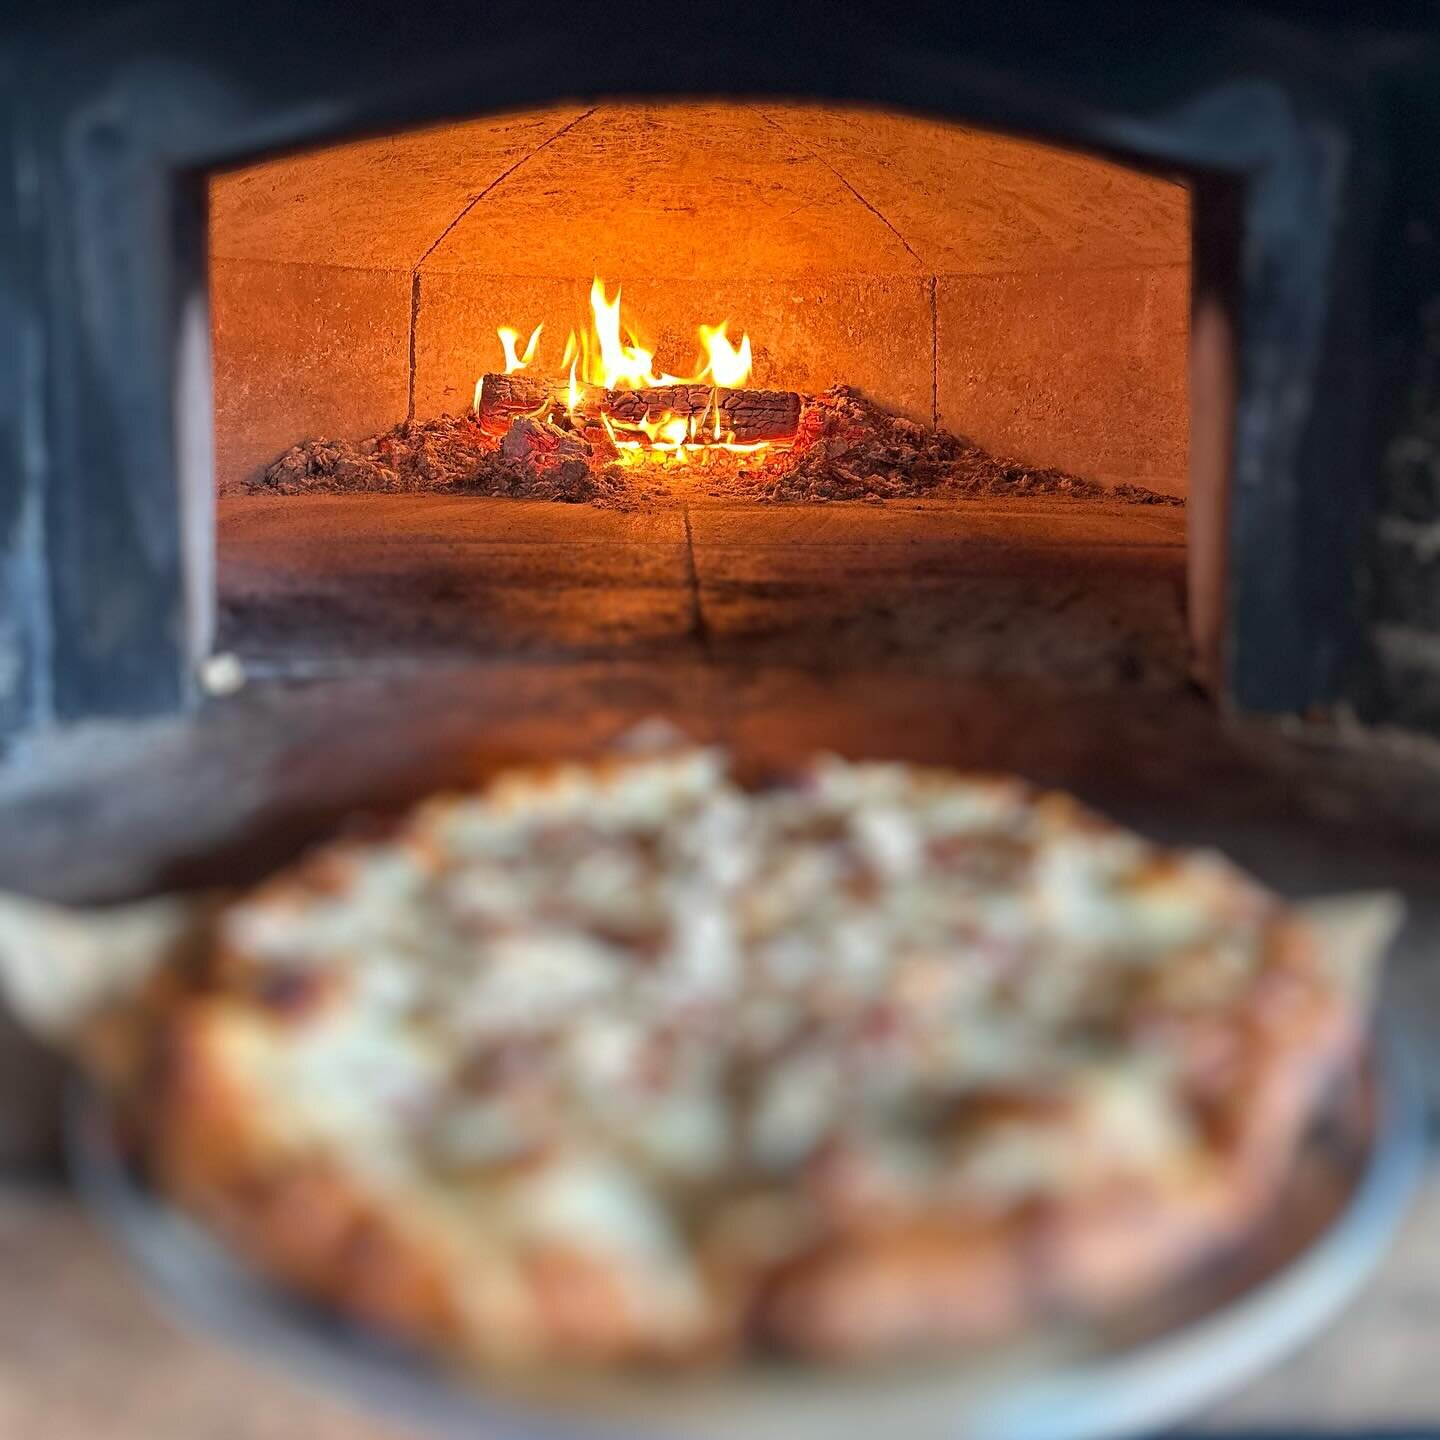 Guess who&rsquo;s back, back again? 🐔🥓☑️ 

All of our secret menu items are available on Slice now 🤫 LINK IN BIO 🔗

#shadrachsfieryfurnace #pizza #personalpies #madetoorder #custom #brickoven #familyowned #local #girlboss #under30 #woodfired #cen